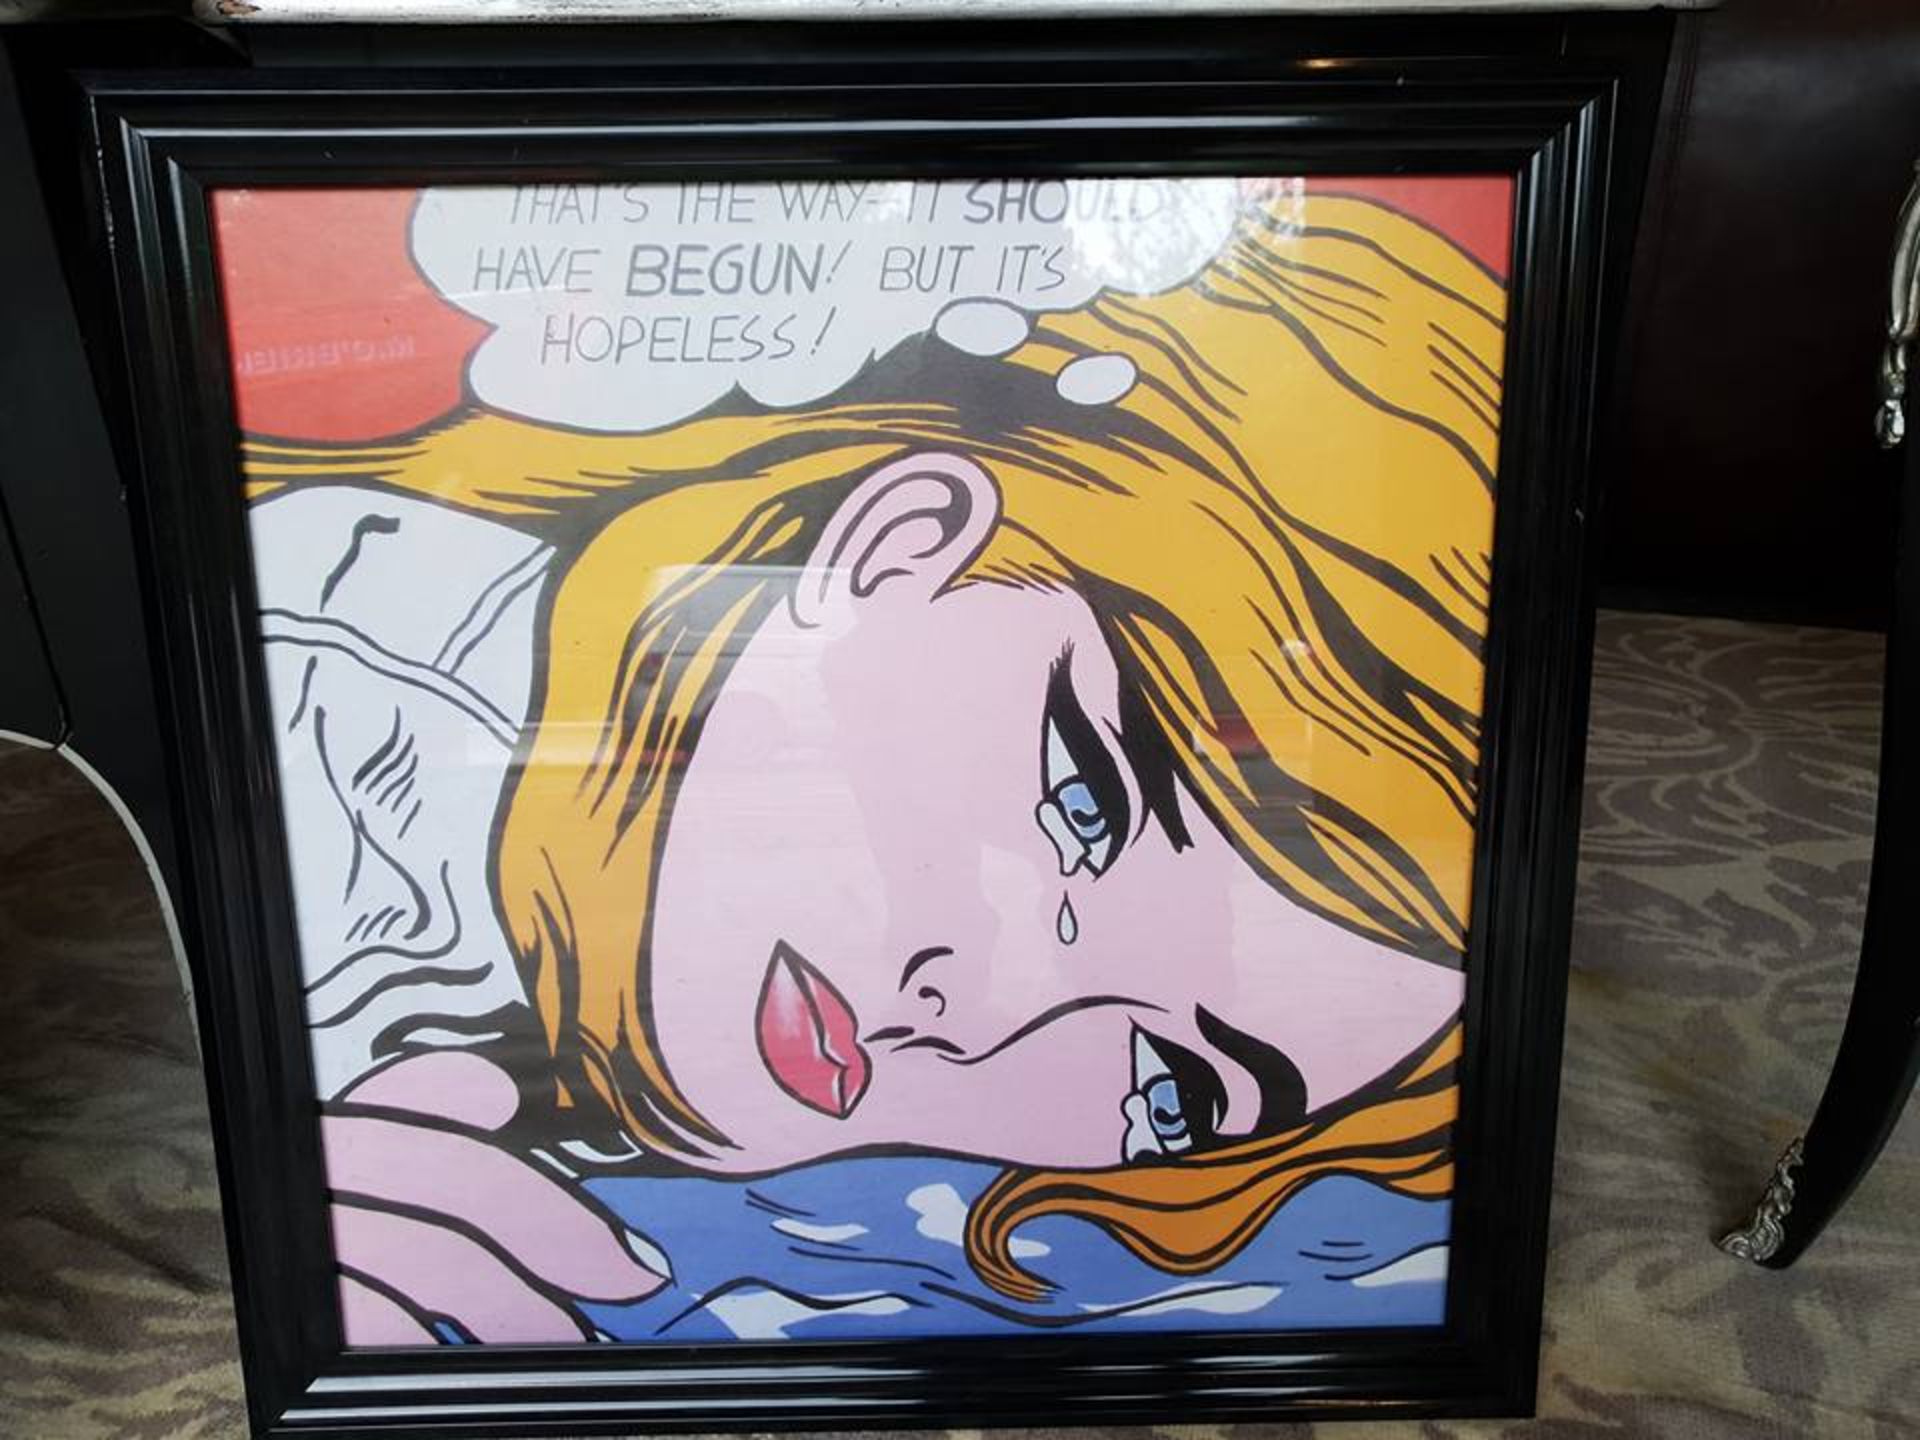 Print Framed After Roy Lichtenstein “That's The Way It Should Have Begun! But It's Hopeless!” Black